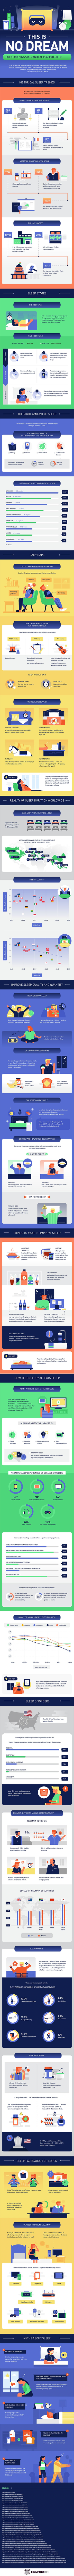 Eye-Opening-Stats-Facts-About-Sleep-Infographic-1